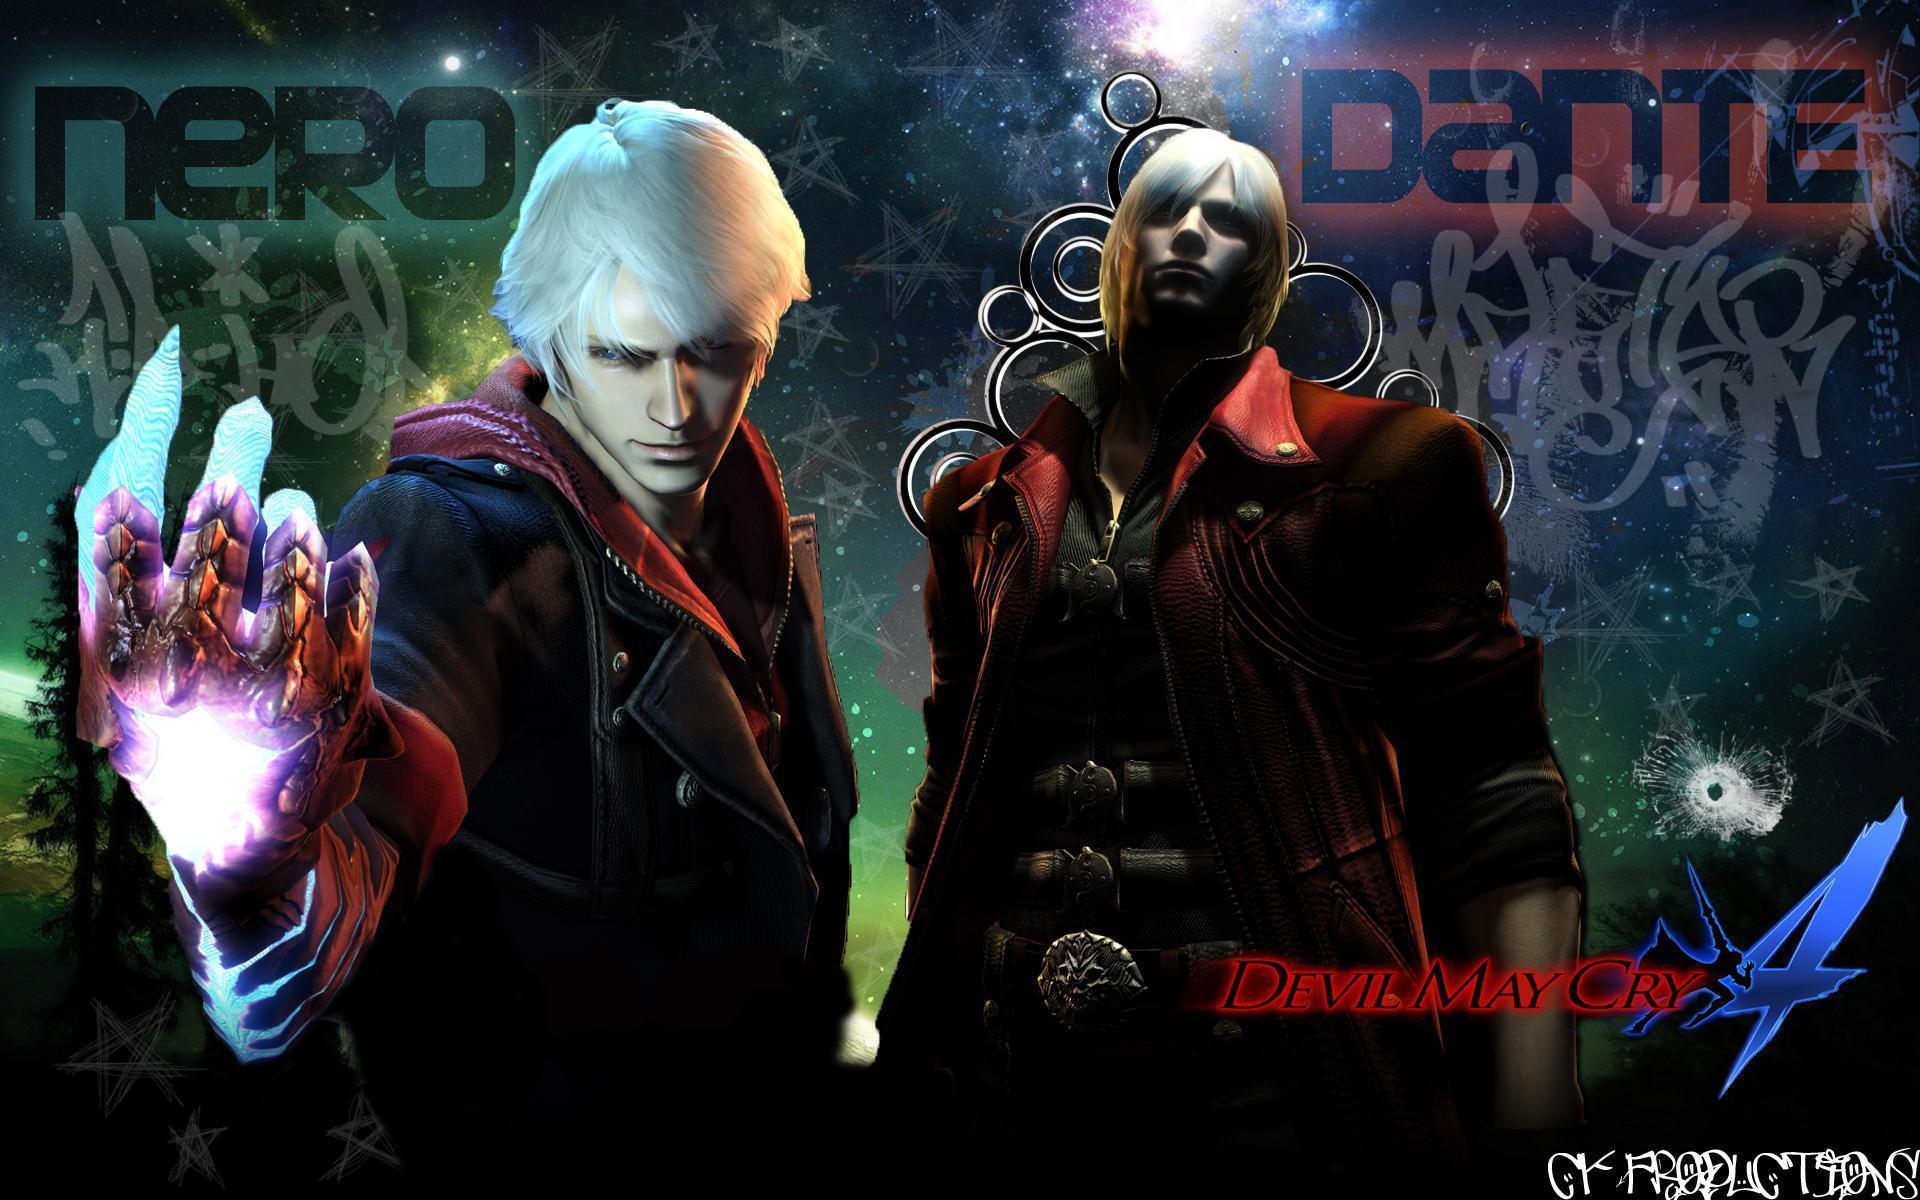 Wallpaper of Devil May Cry in HD to set as background